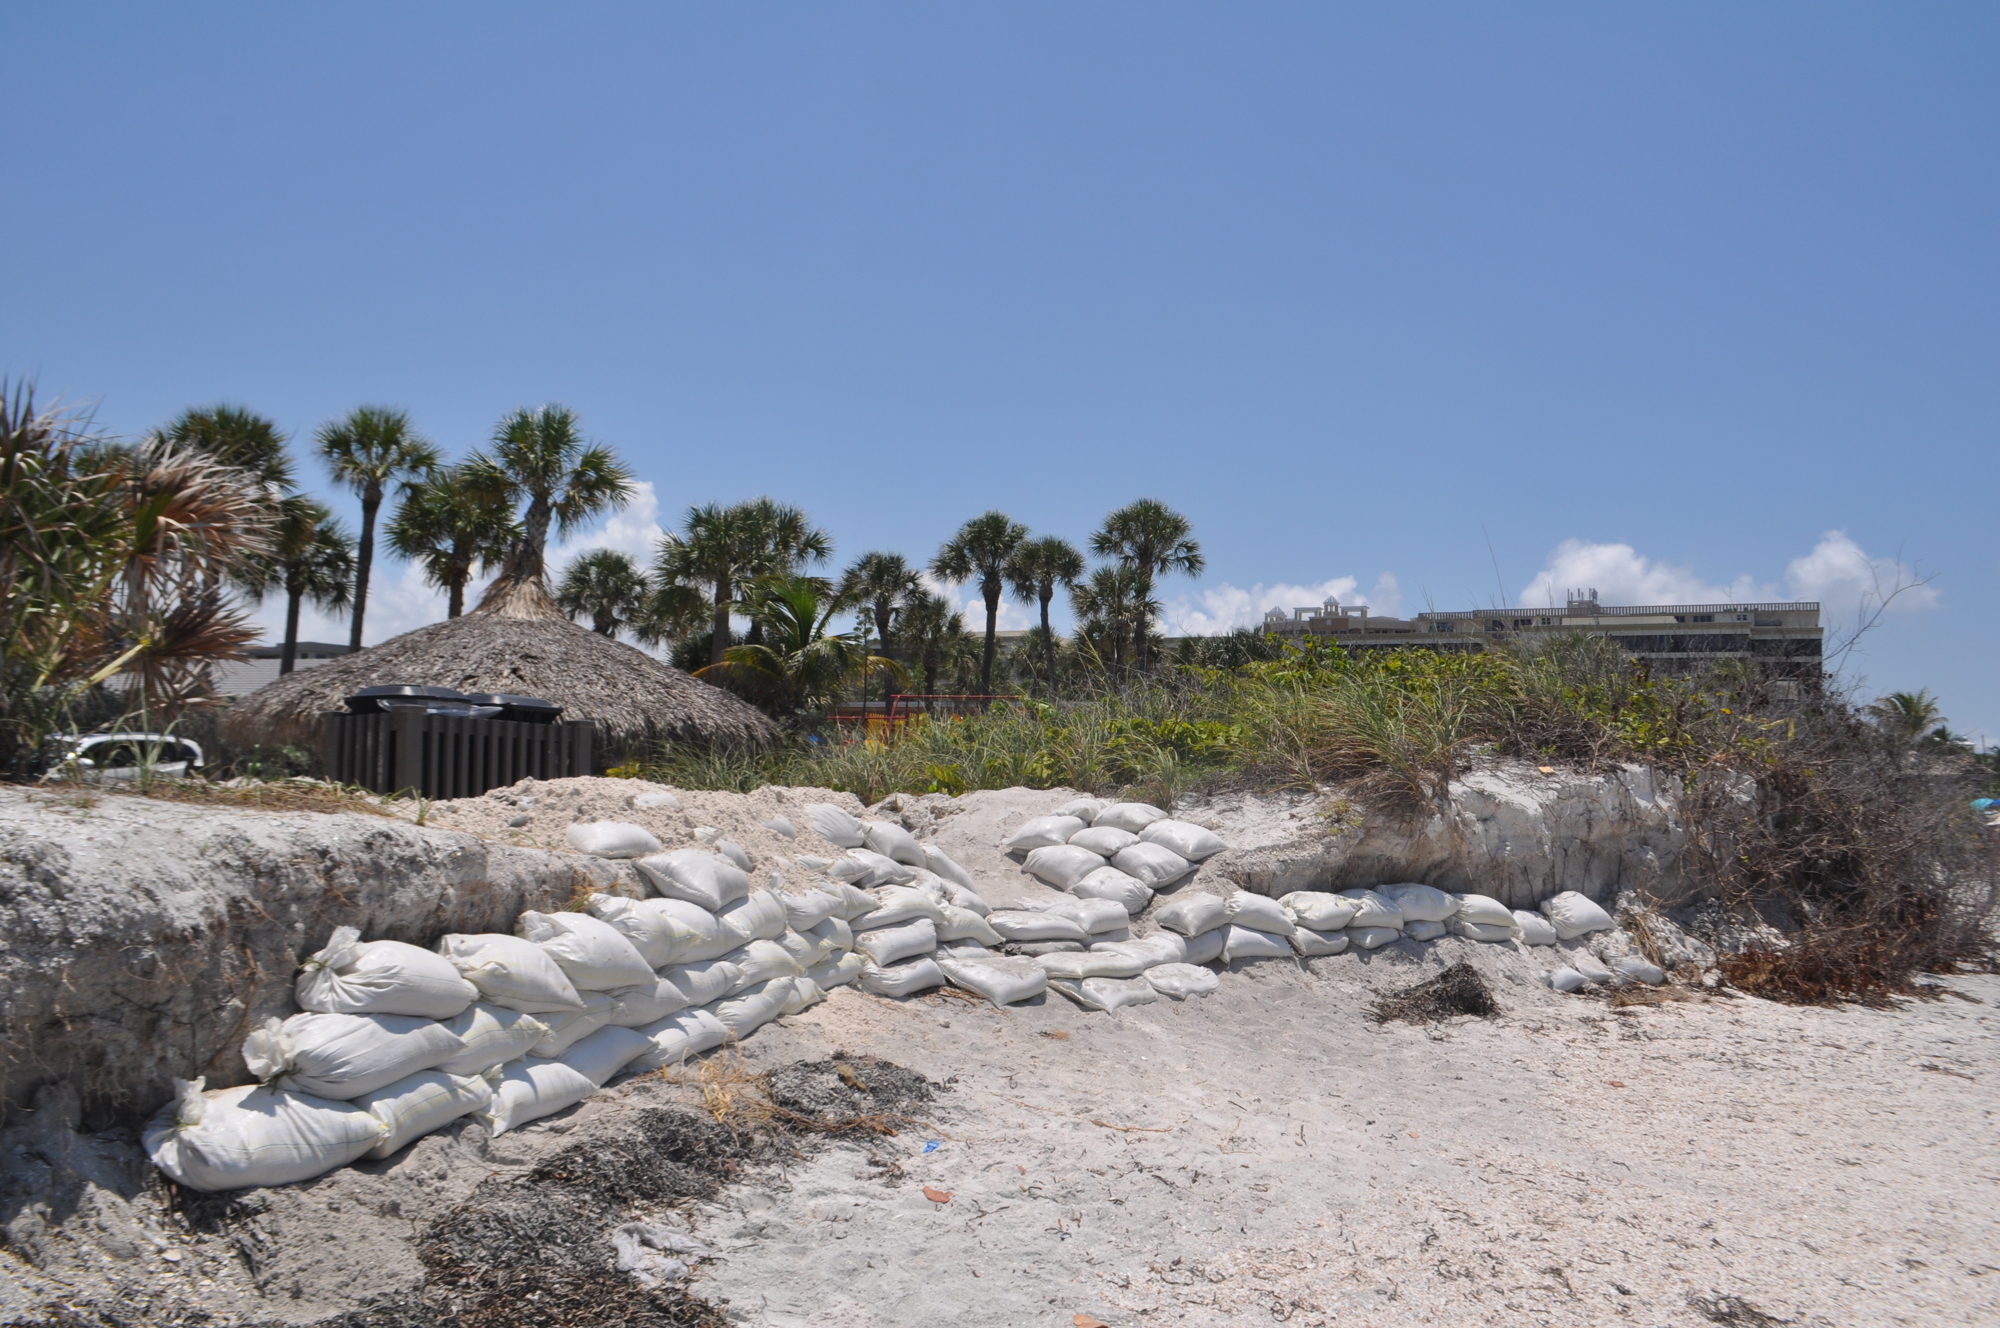 The eroded Lido Key shoreline showed signs of wear following inclement weather.